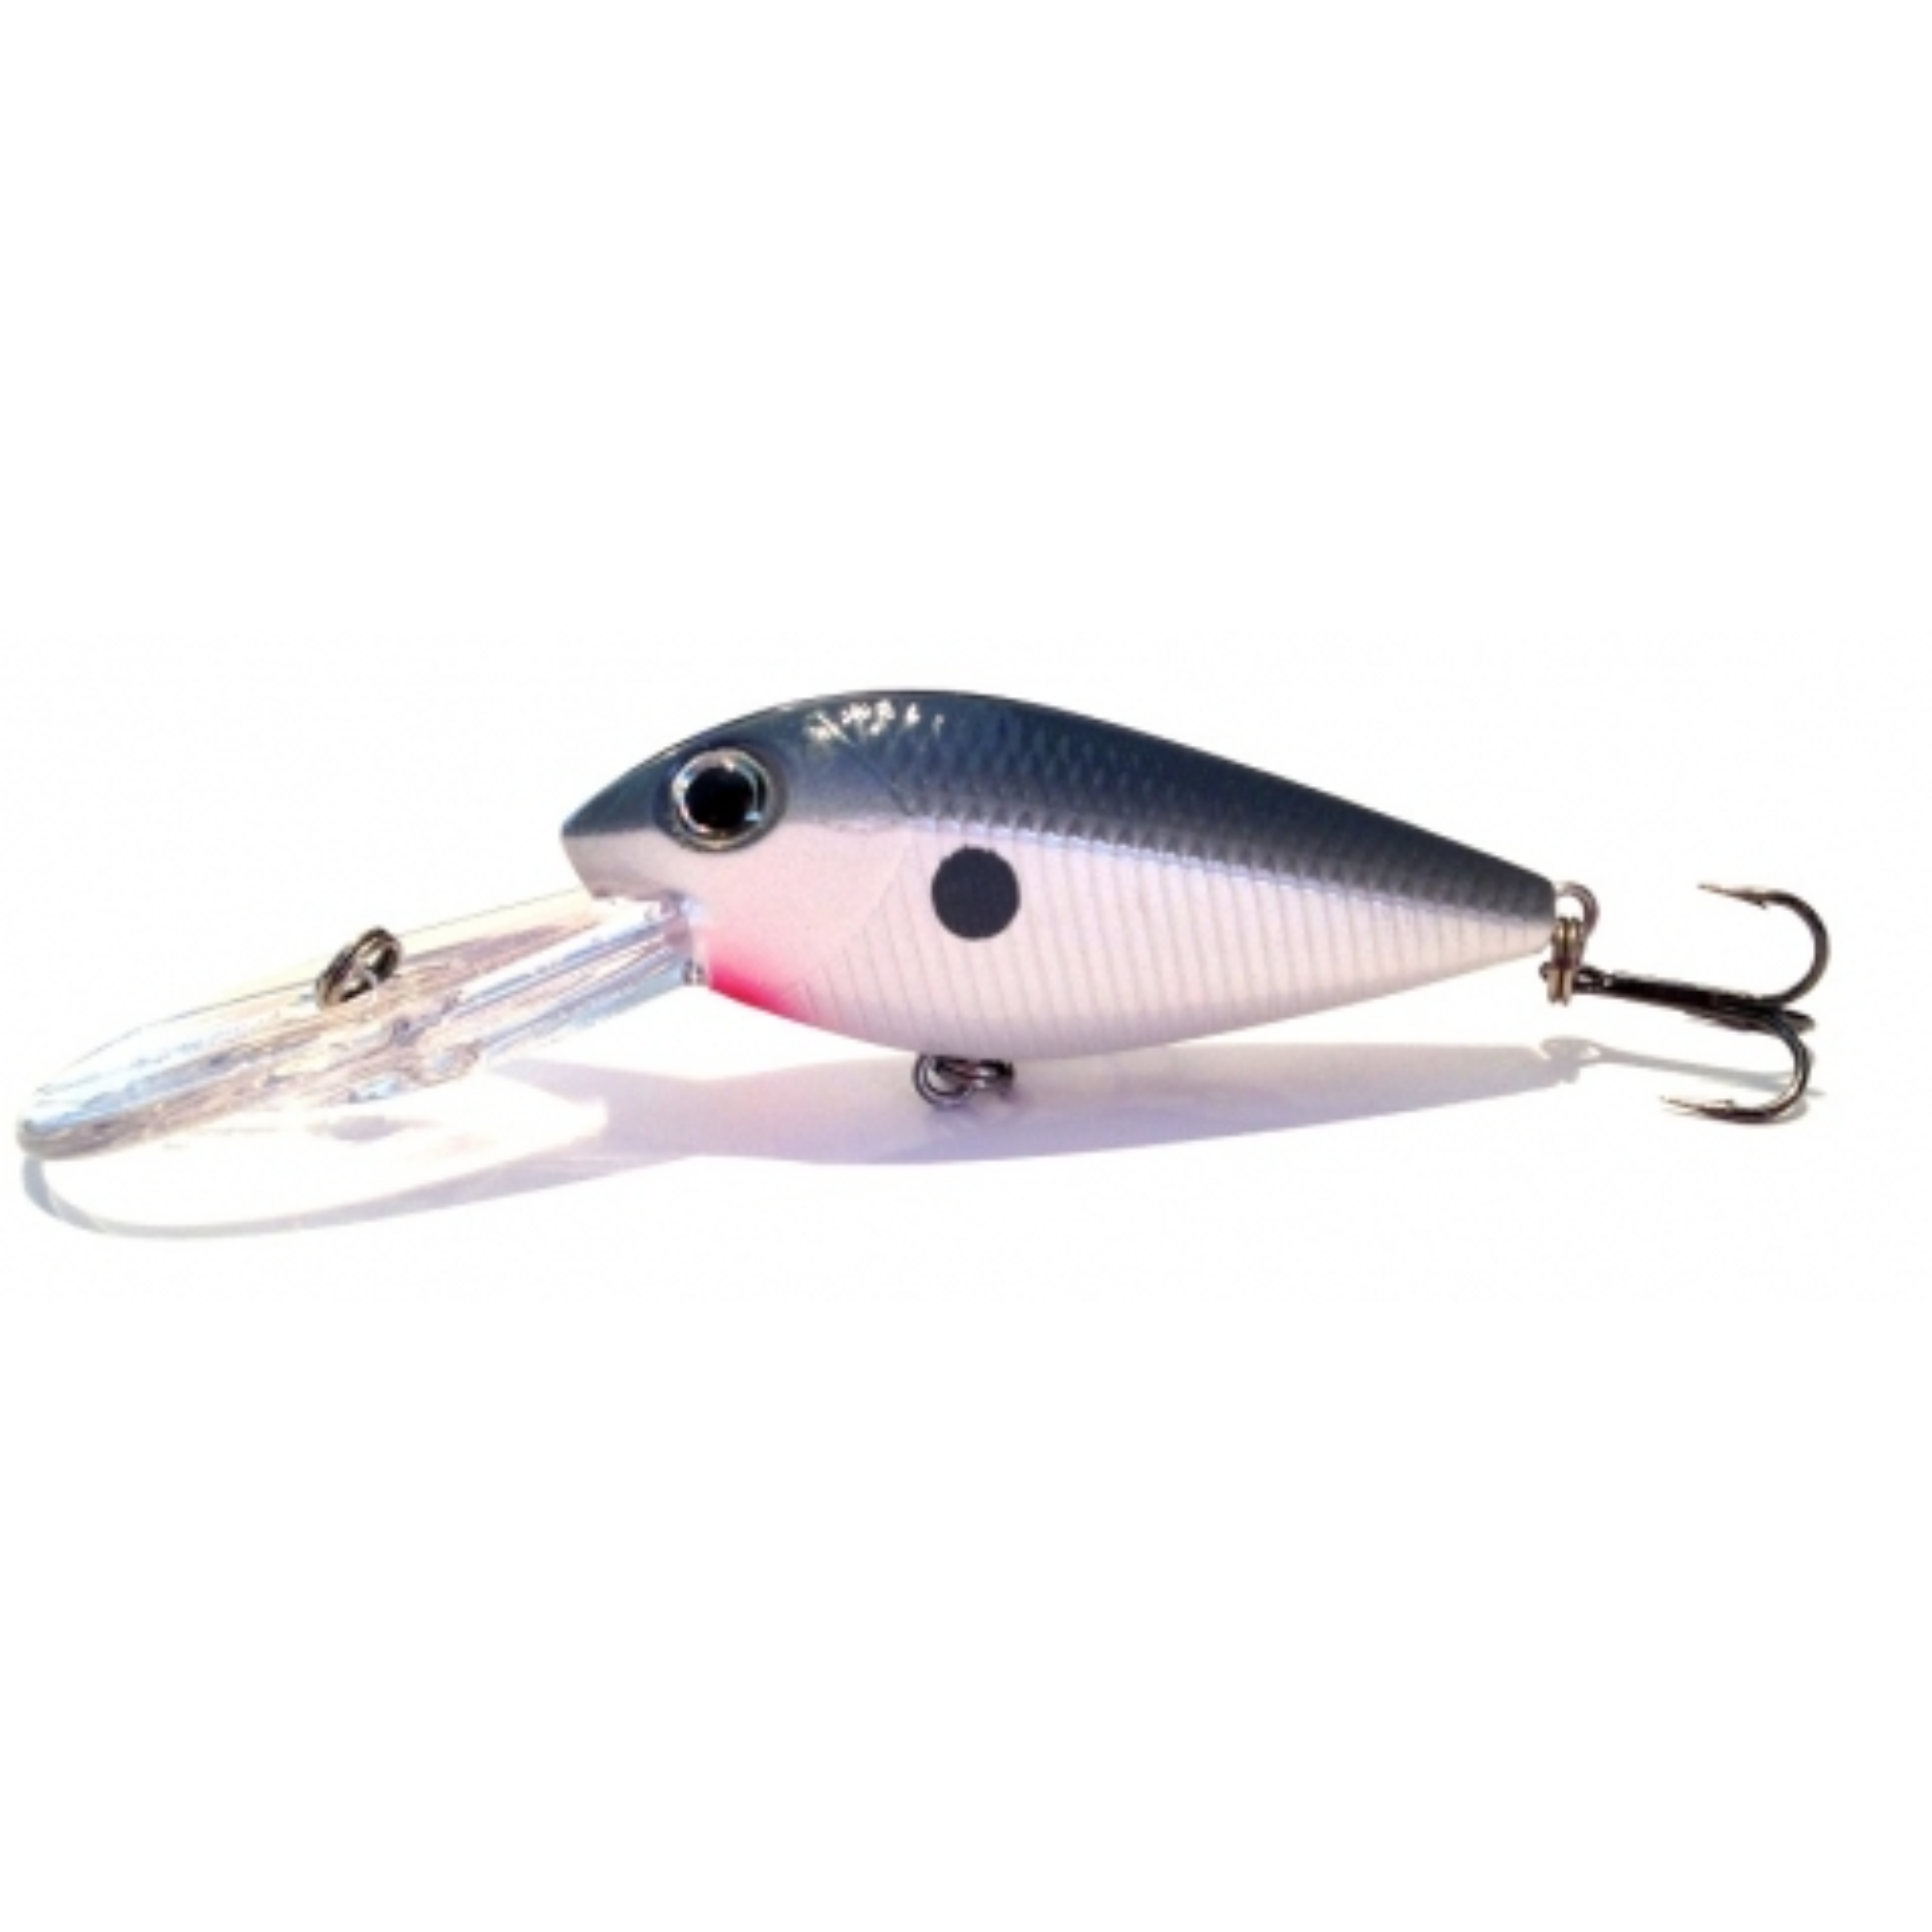 Storm Deep Rattlin' Thinfin 05 - Gizzard Shad 598 - Zone Chasse et Pêche /  Ecotone Val-d'Or